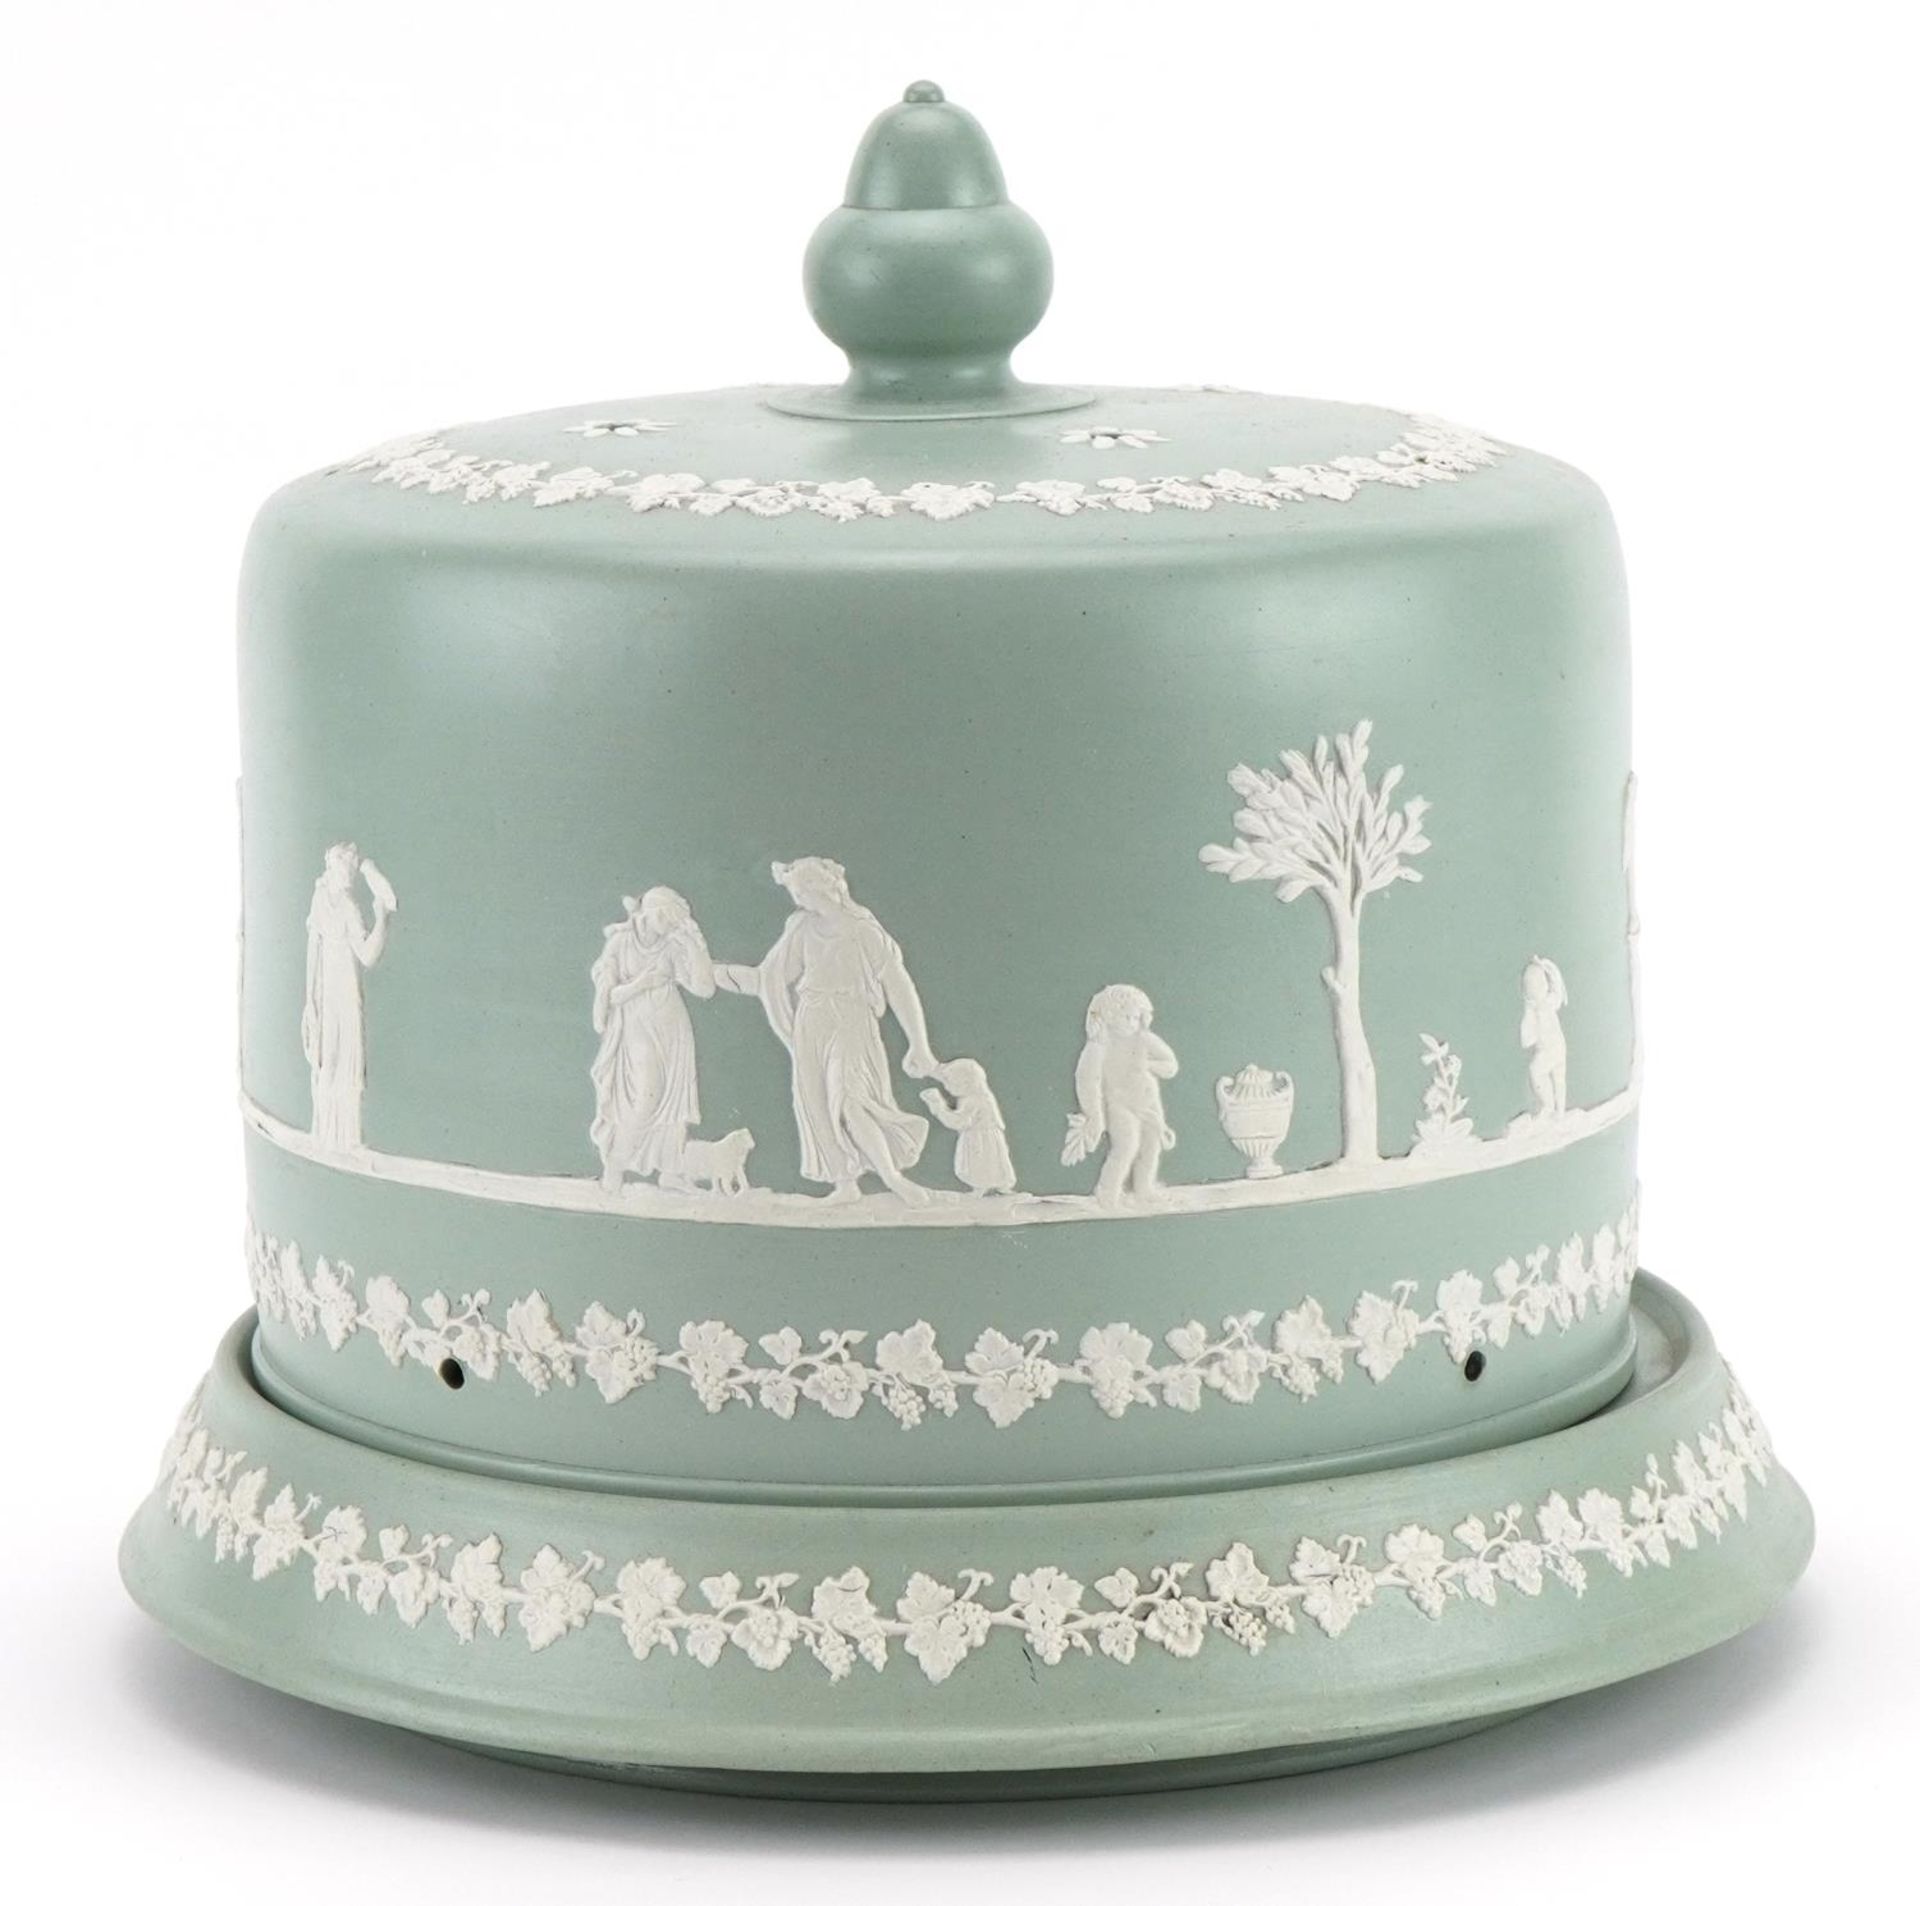 Victorian Jasperware cheese dome on stand decorated with classical figures, the base 27cm in